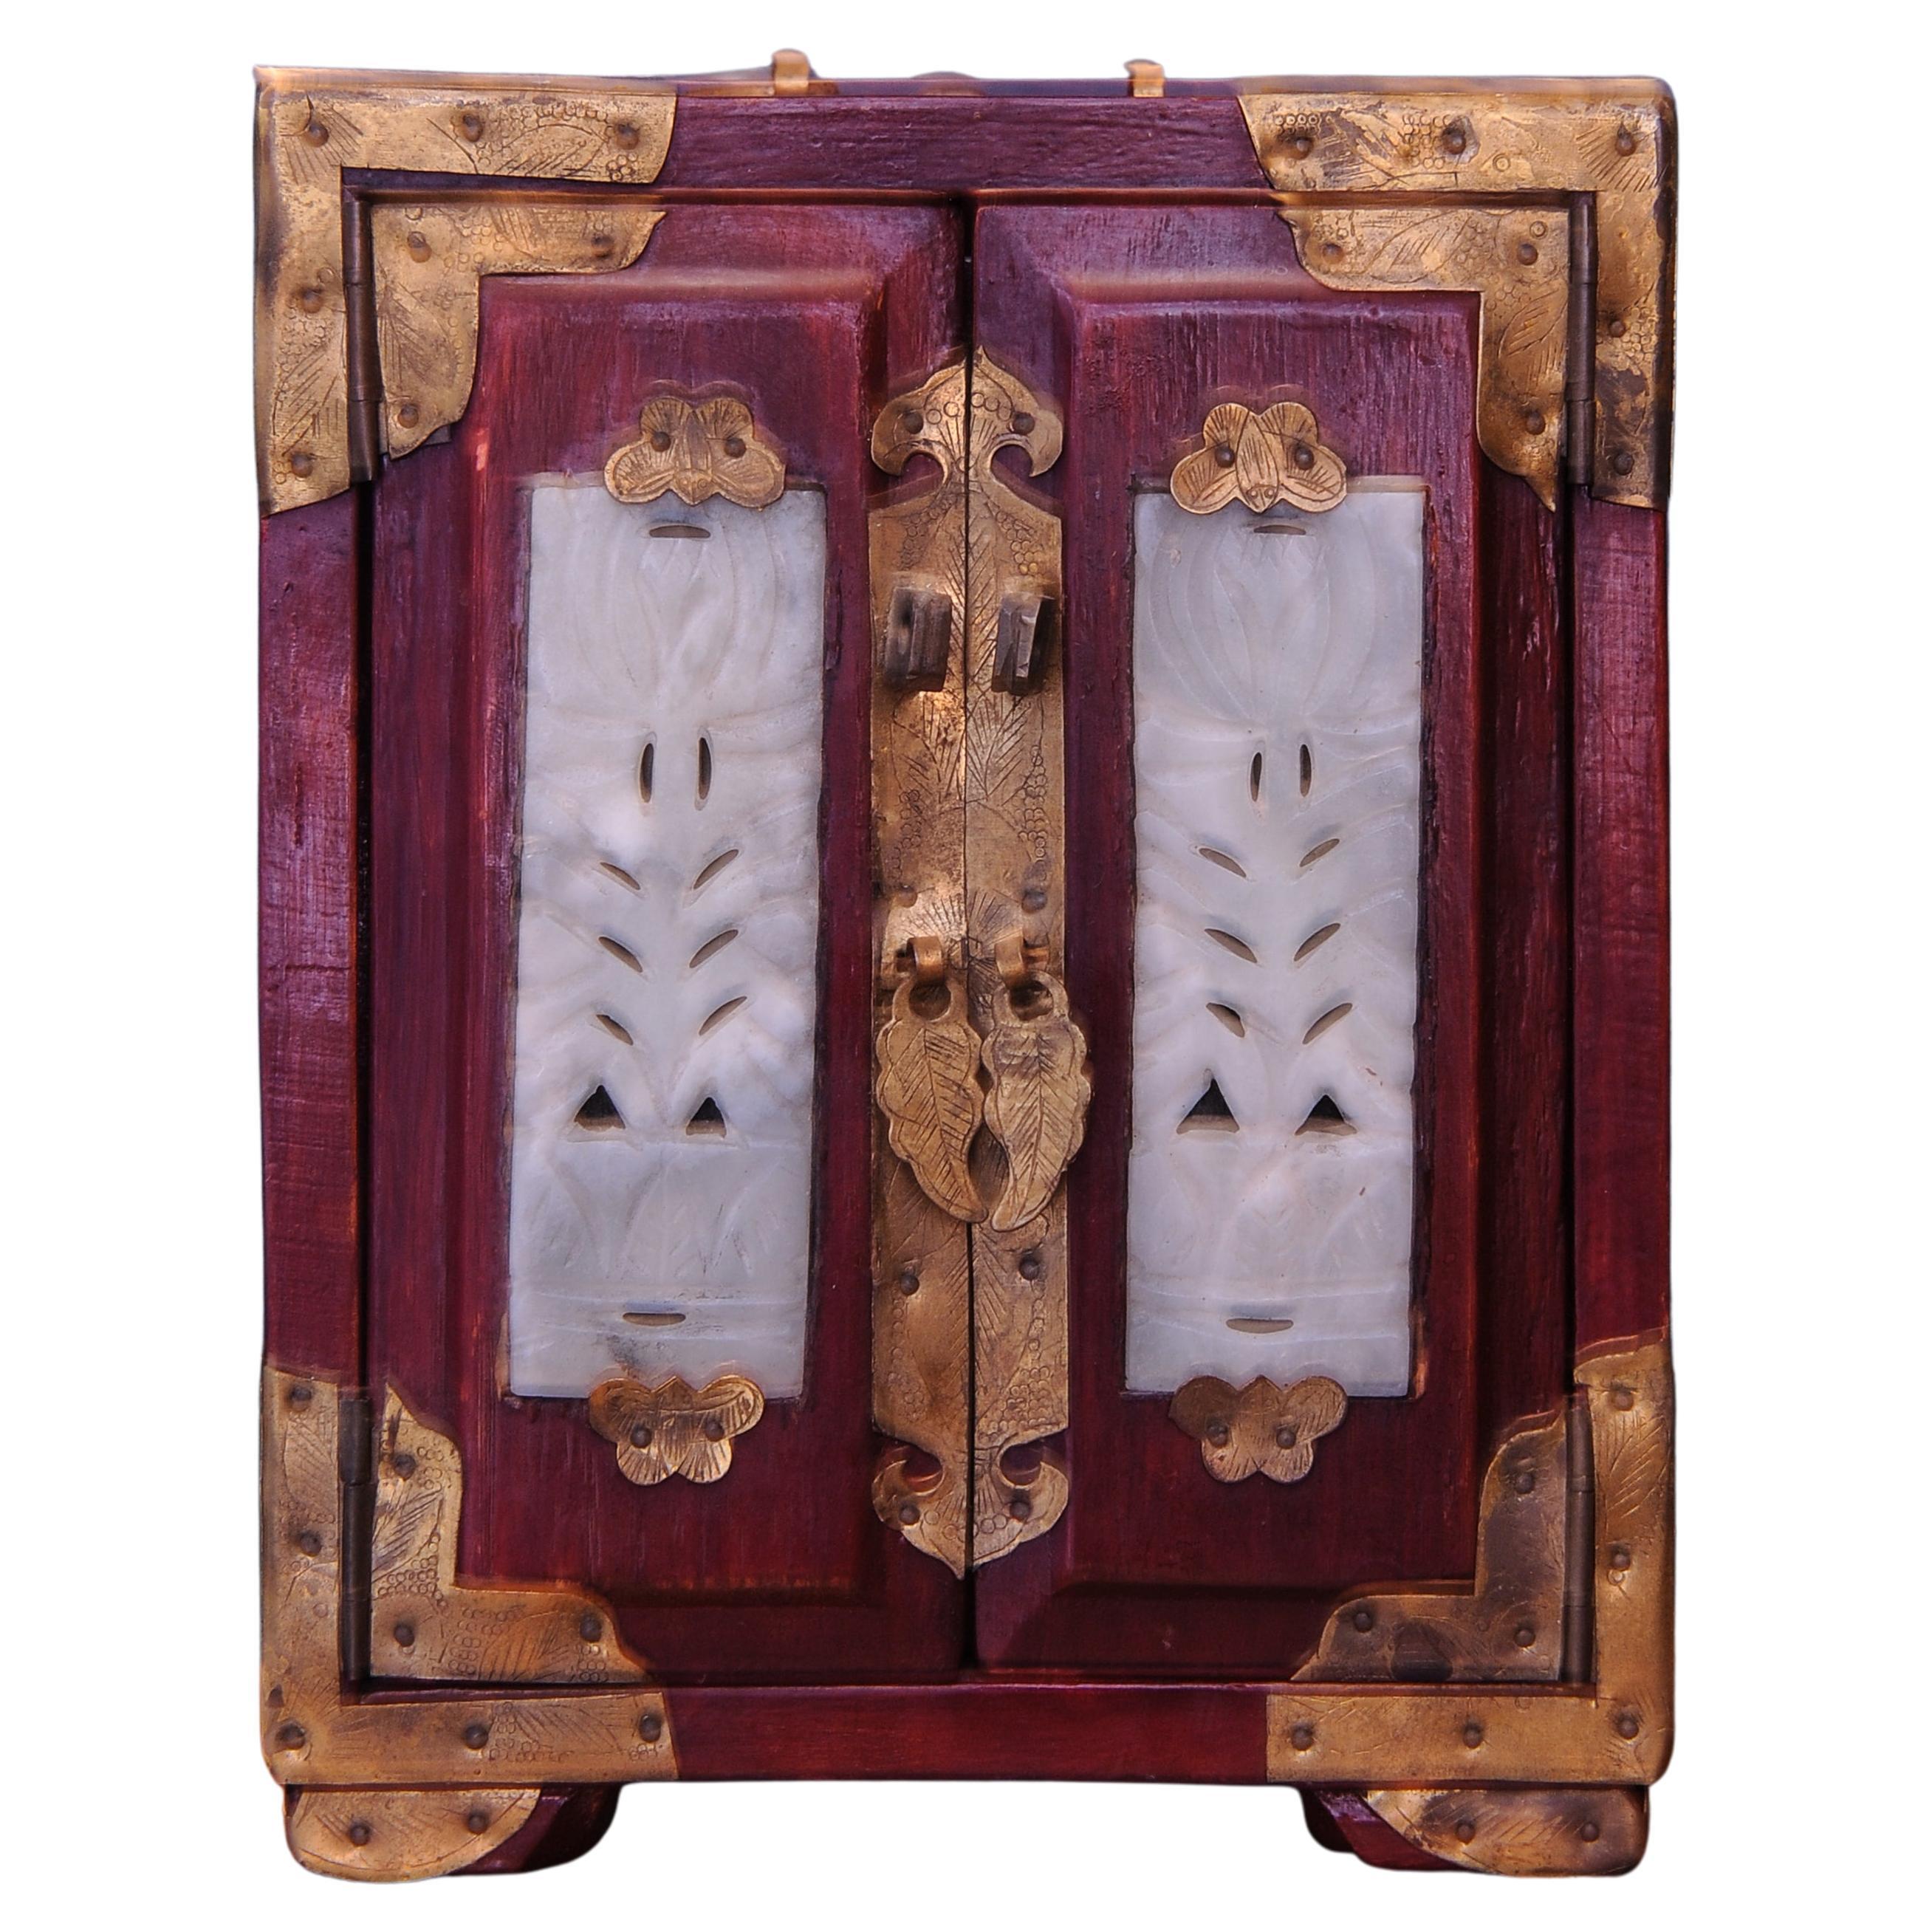 Antique Chinese Mahogany Brass and Jade Traditional Keepsake Cabinet 
Three drawer Jewellery Cabinet Chest or Box

Three drawer patterned silk lined cabinet 
In good vintage condition, lovely Christmas gift.  
